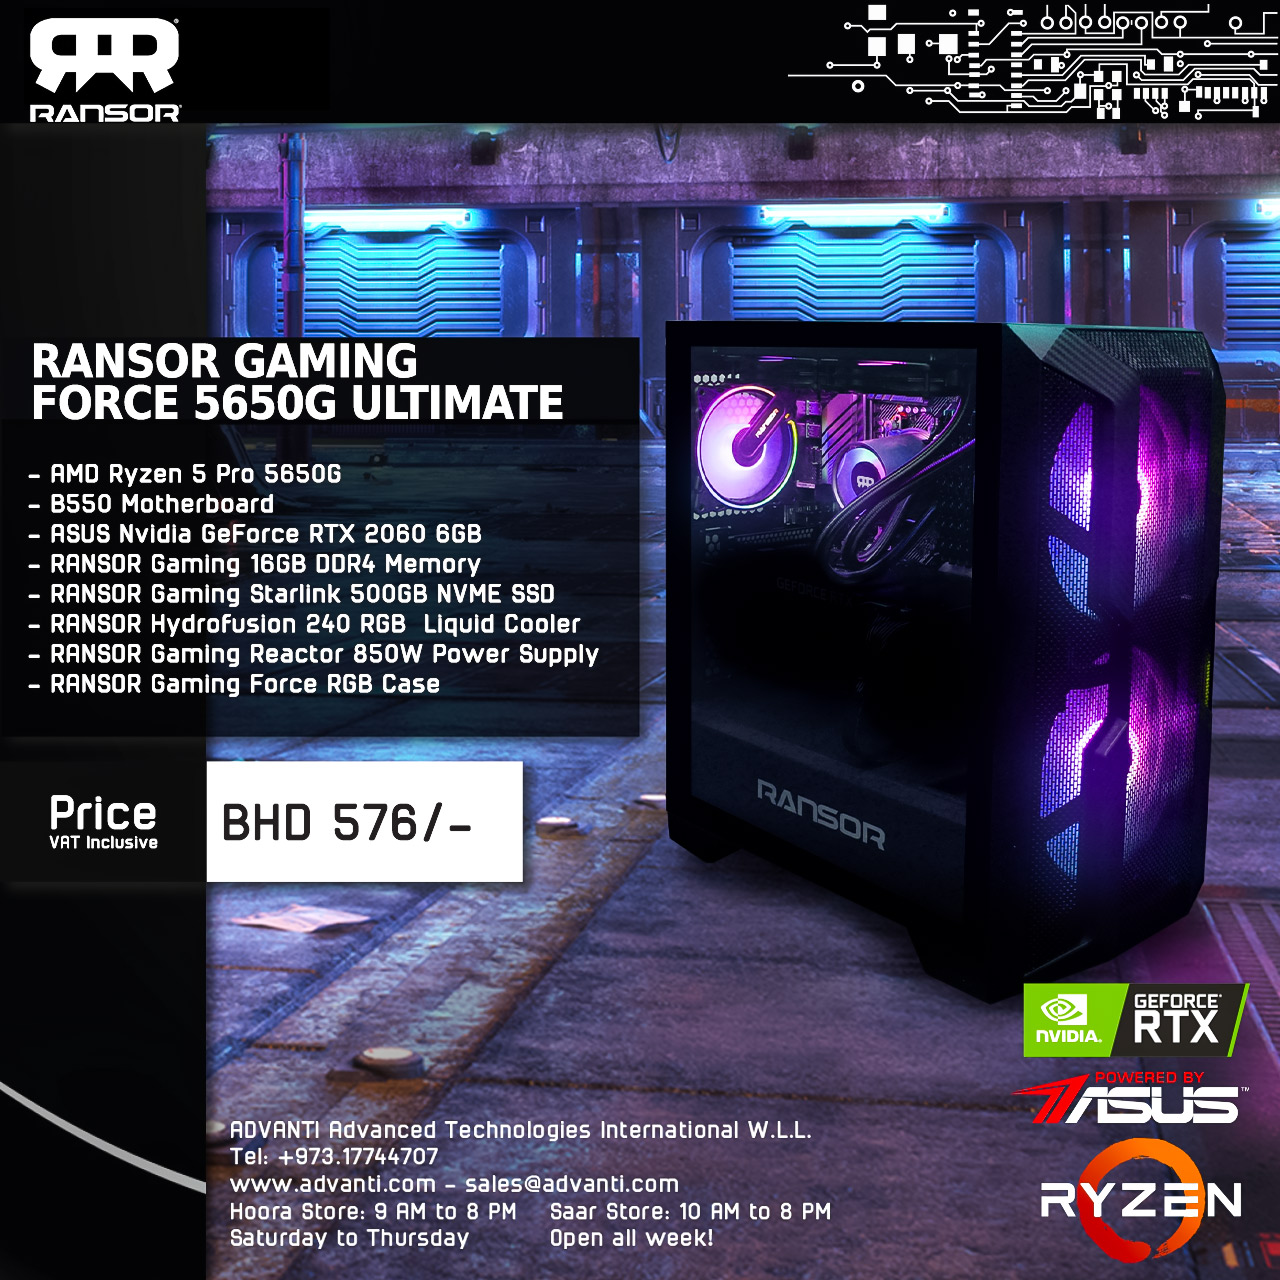 ransor-gaming-force-ultimate-5650g-w-206